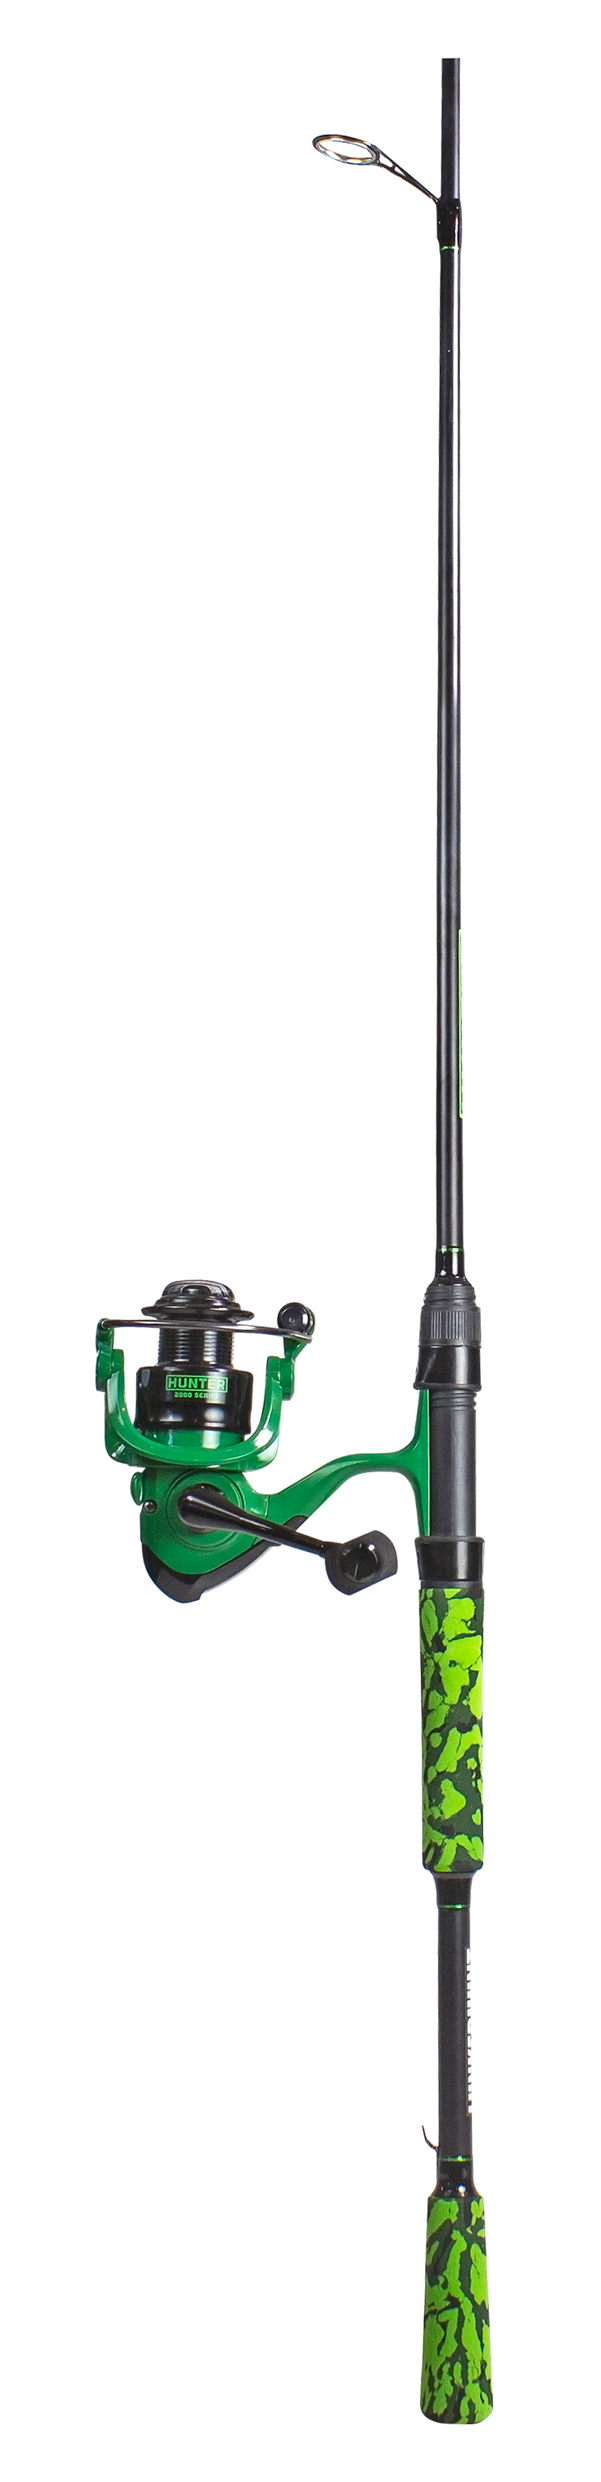 Lunkerhunt Hunter Spinning Rod Combo SHNTCOM01 , $8.00 Off with Free S&H —  CampSaver